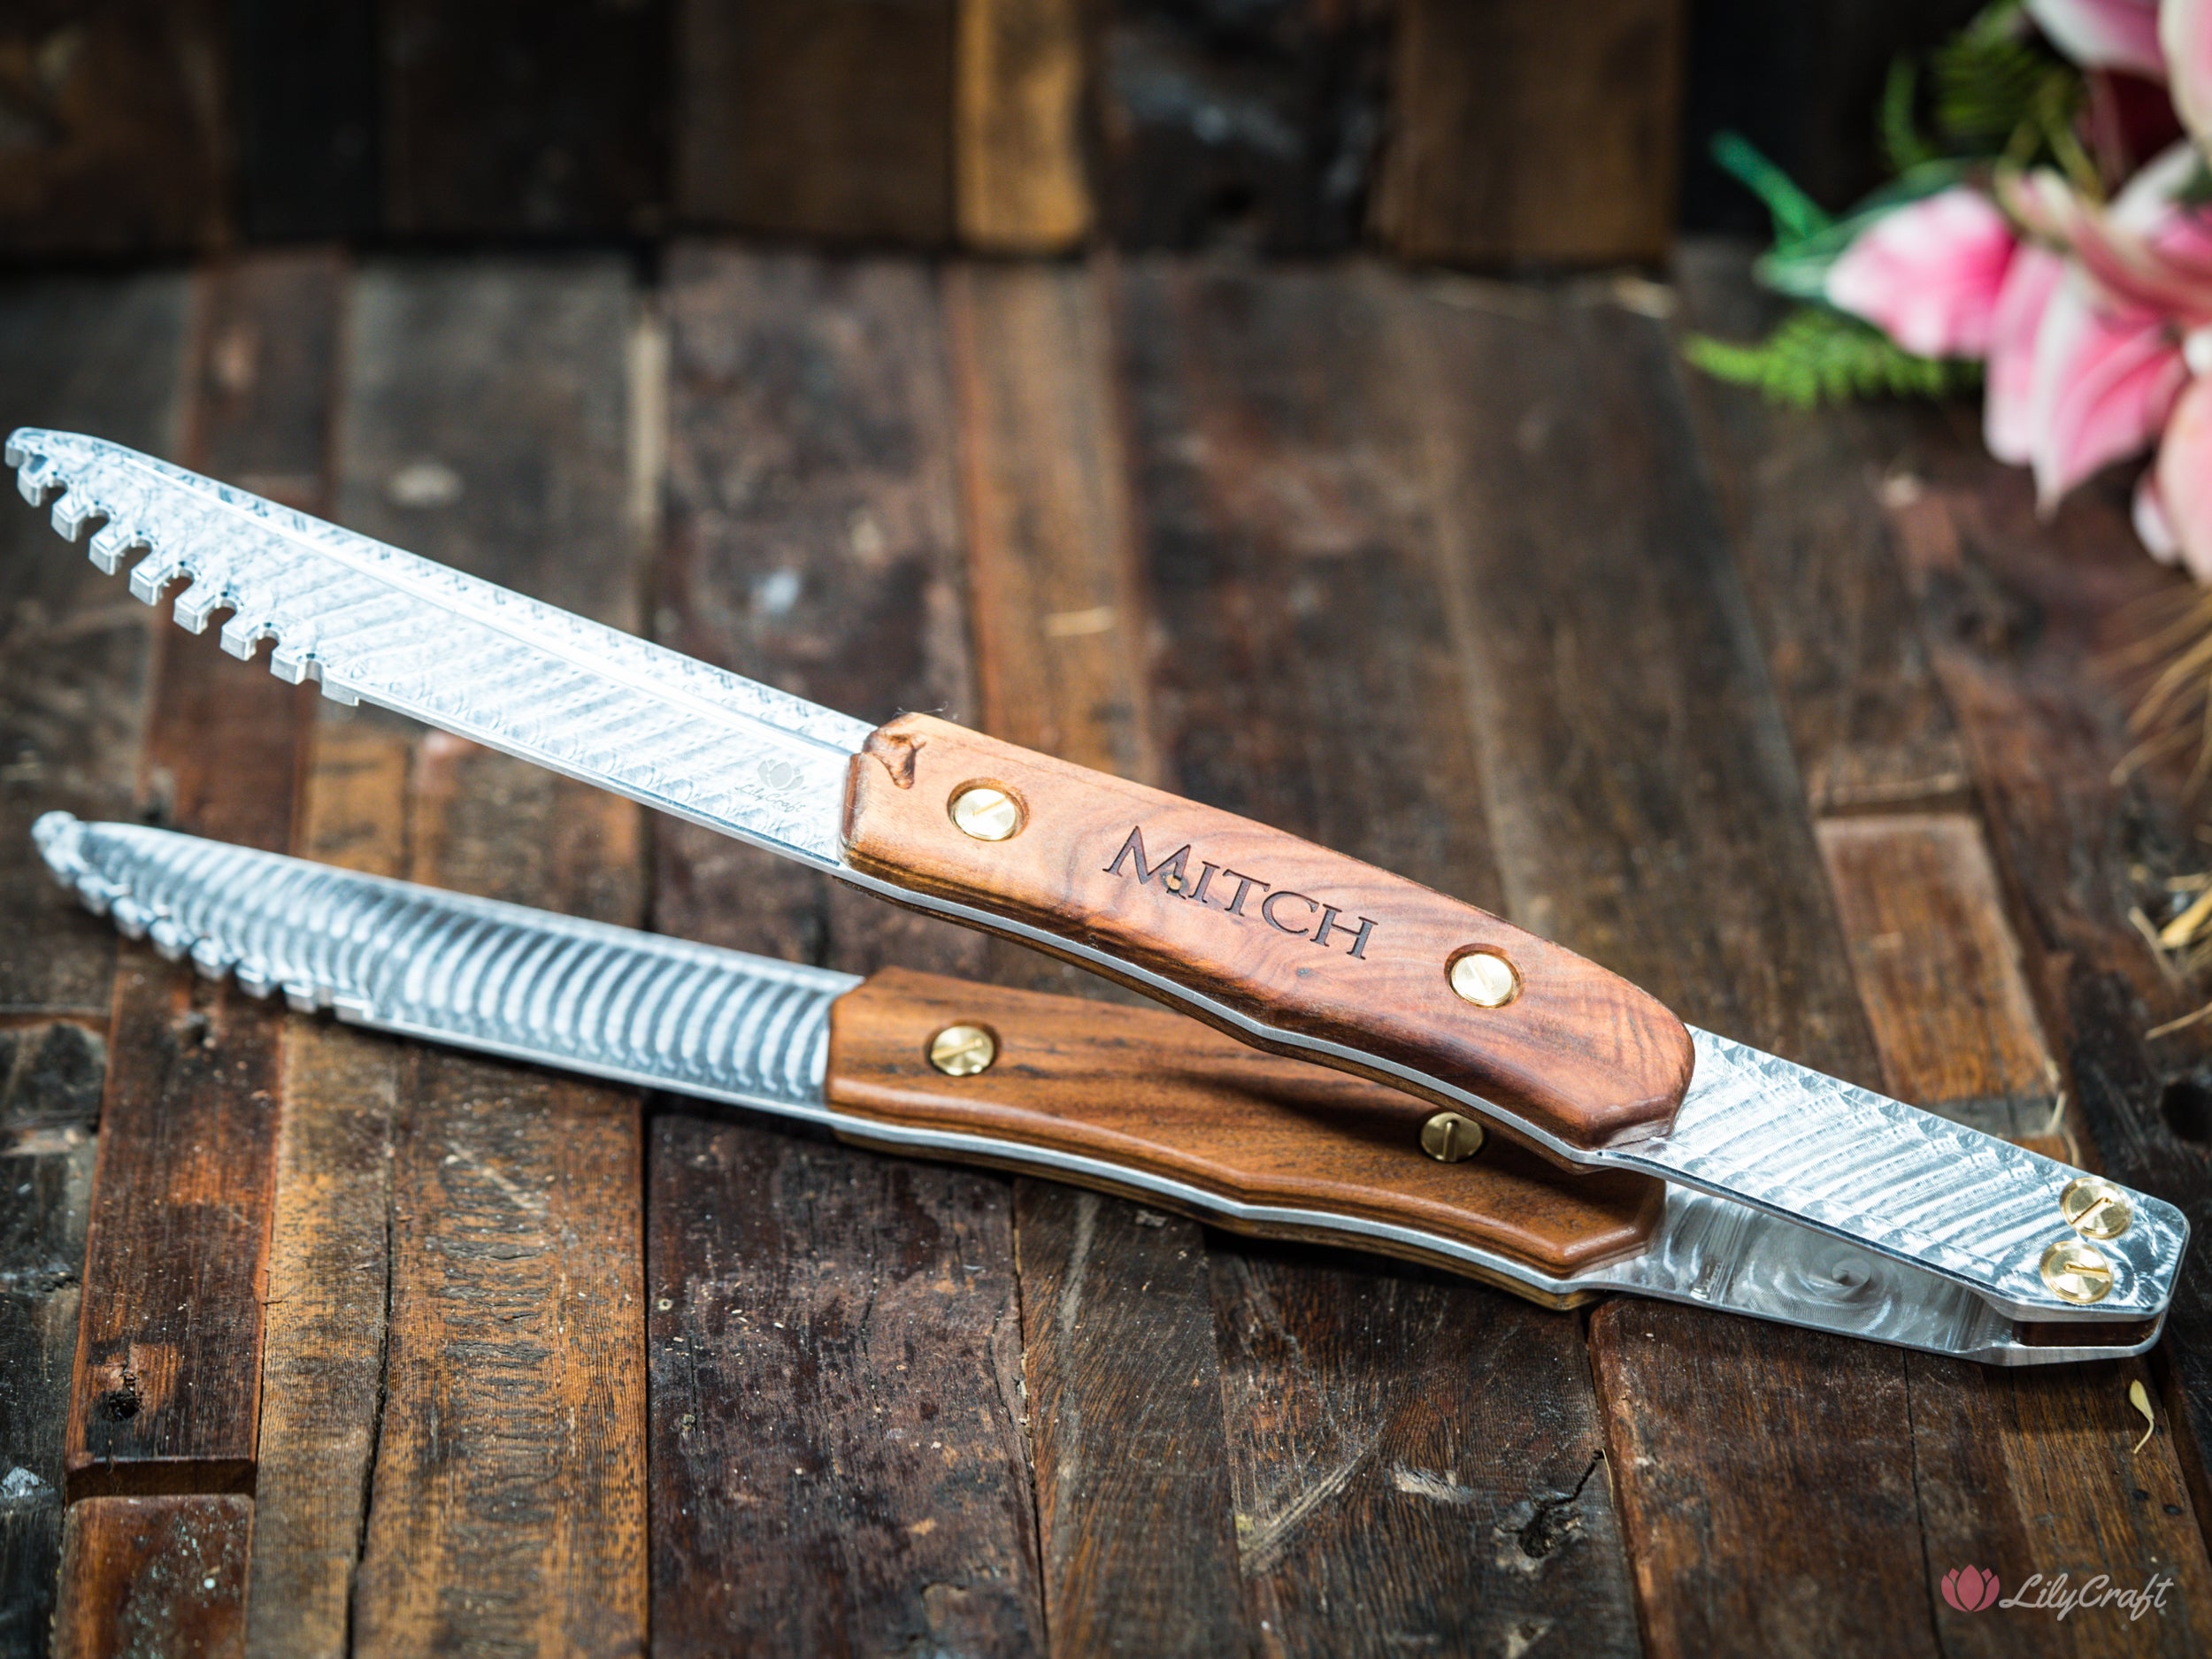 Personalised grilling tool set for Dad - custom engraved tongs with gift case included.